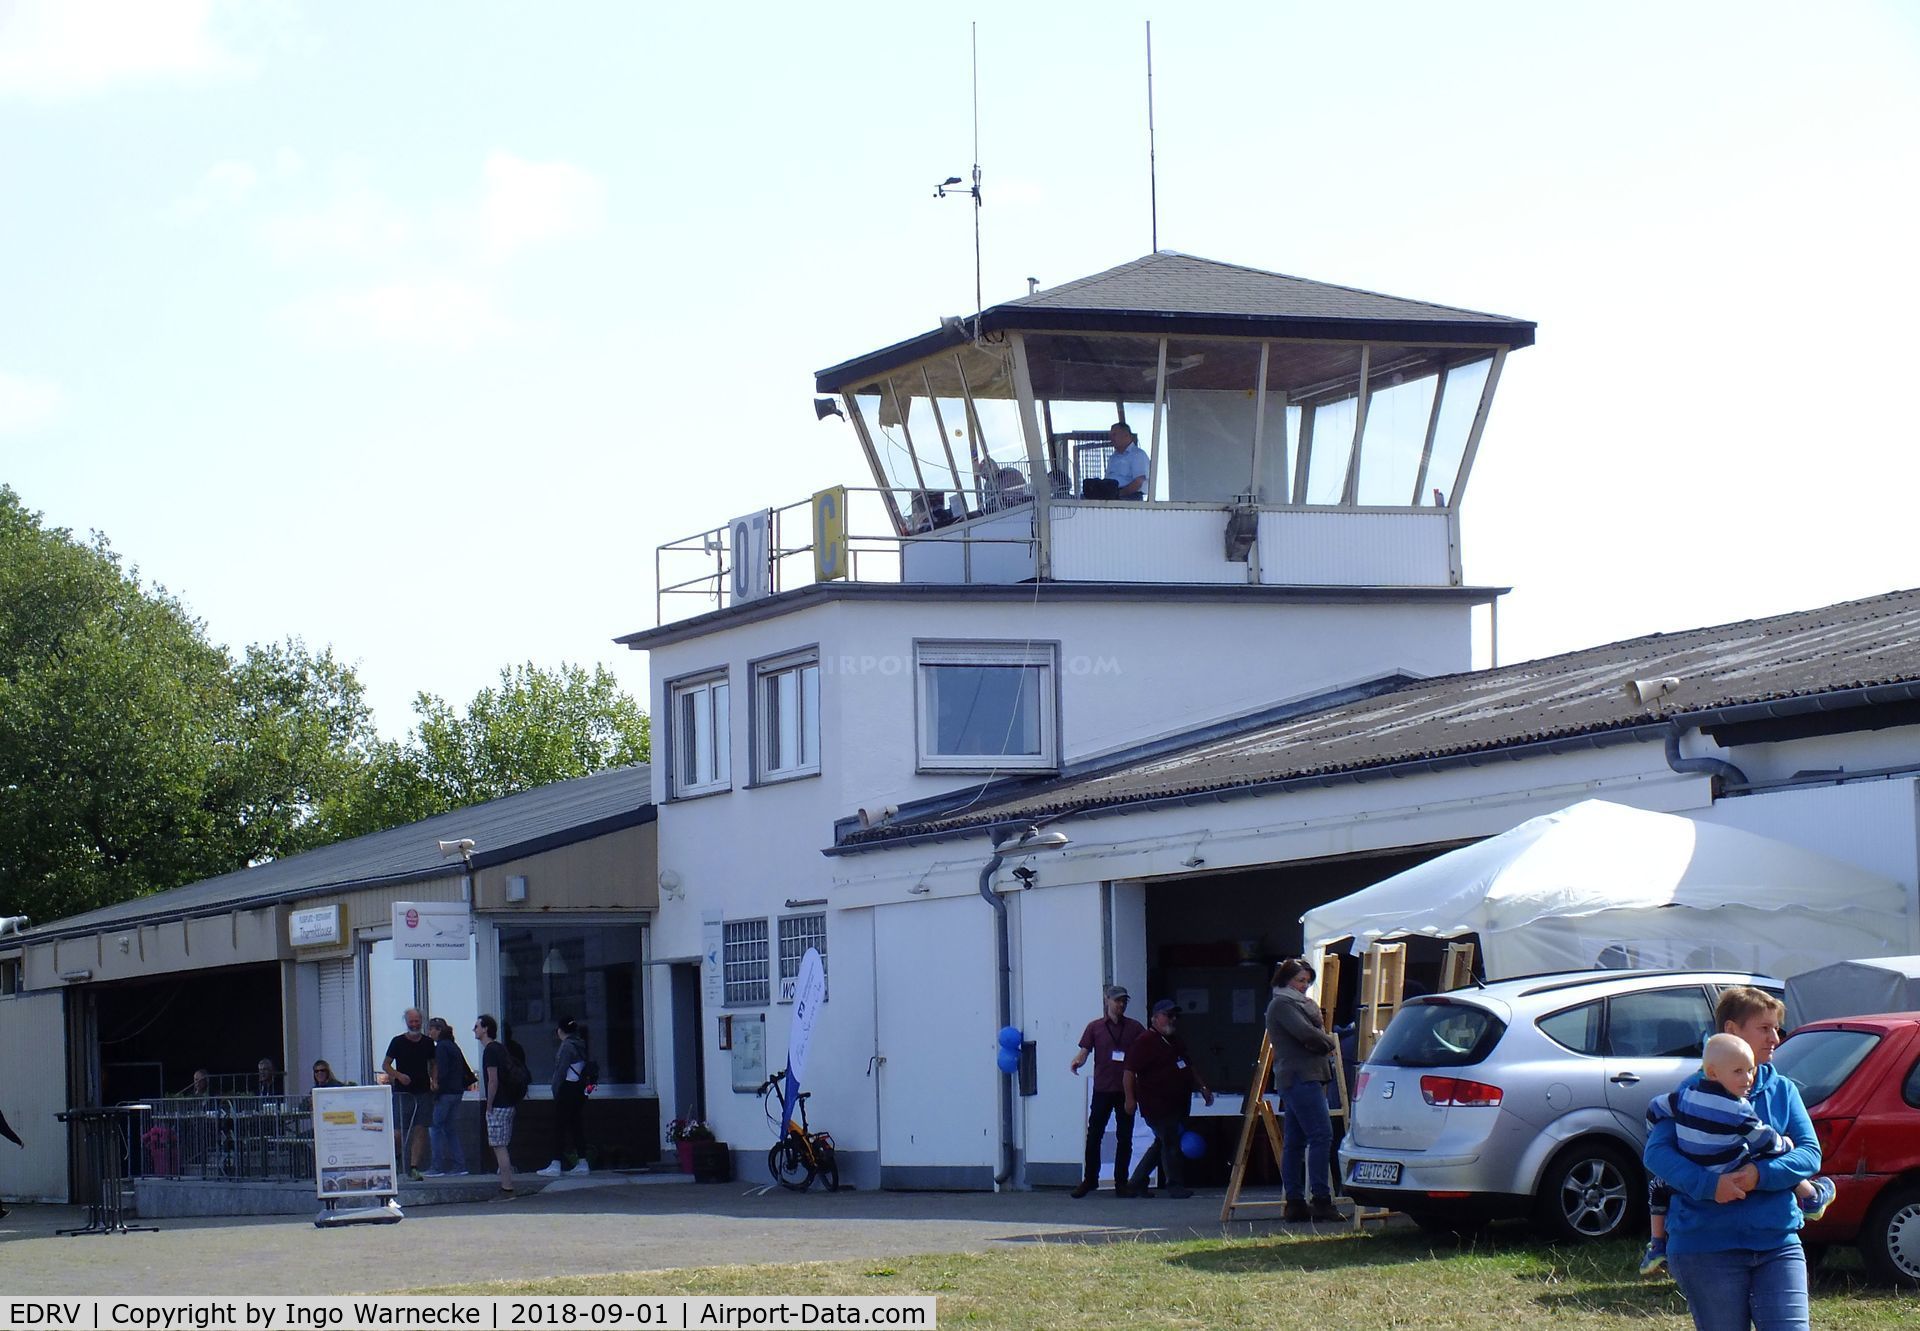 EDRV Airport - airside view of terminal and tower at Wershofen airfield